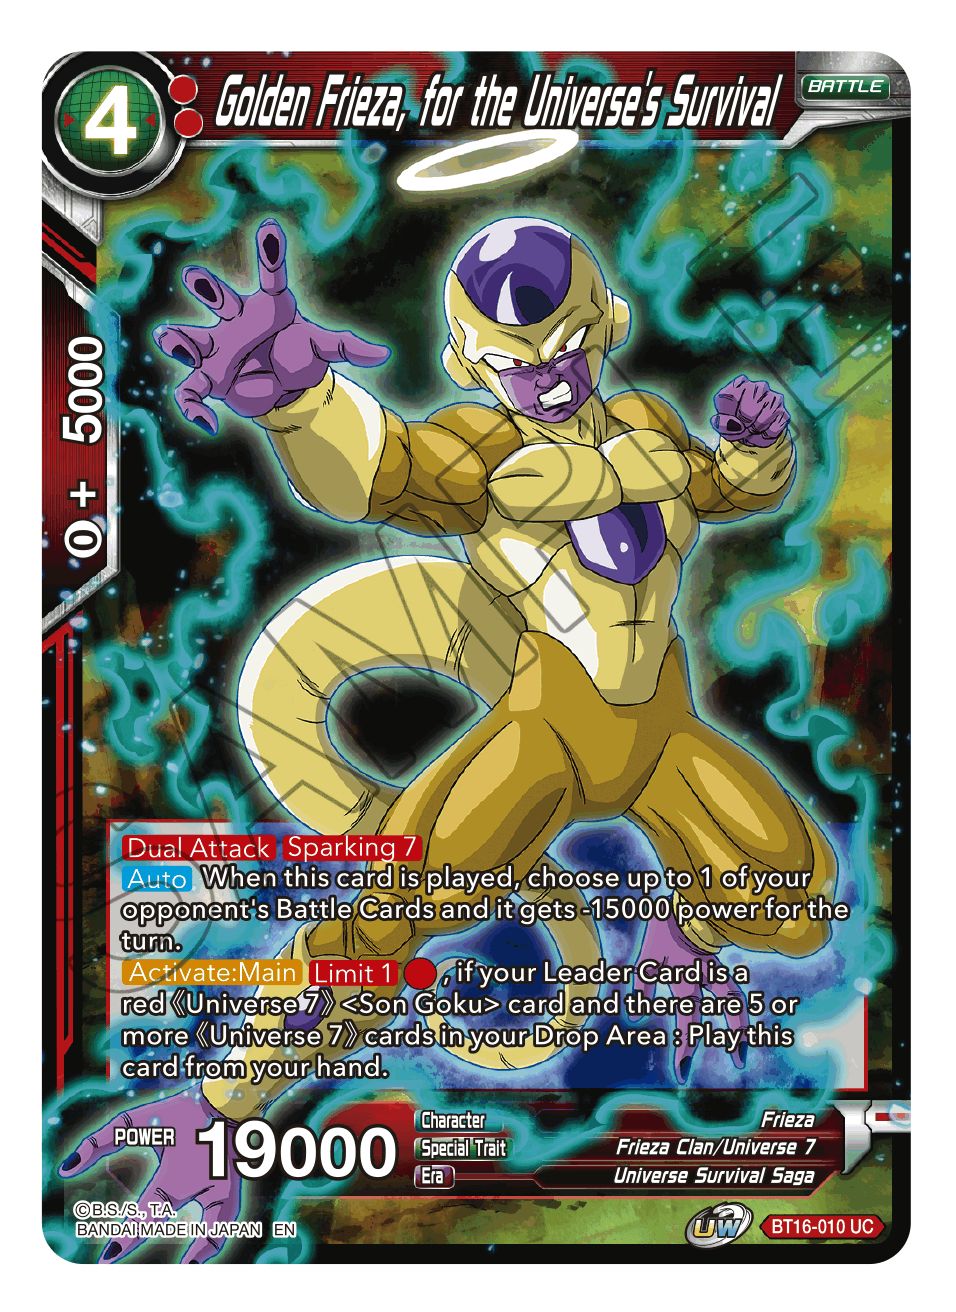 Golden Frieza, for the Universe's Survival - Realm of the Gods - Uncommon - BT16-010